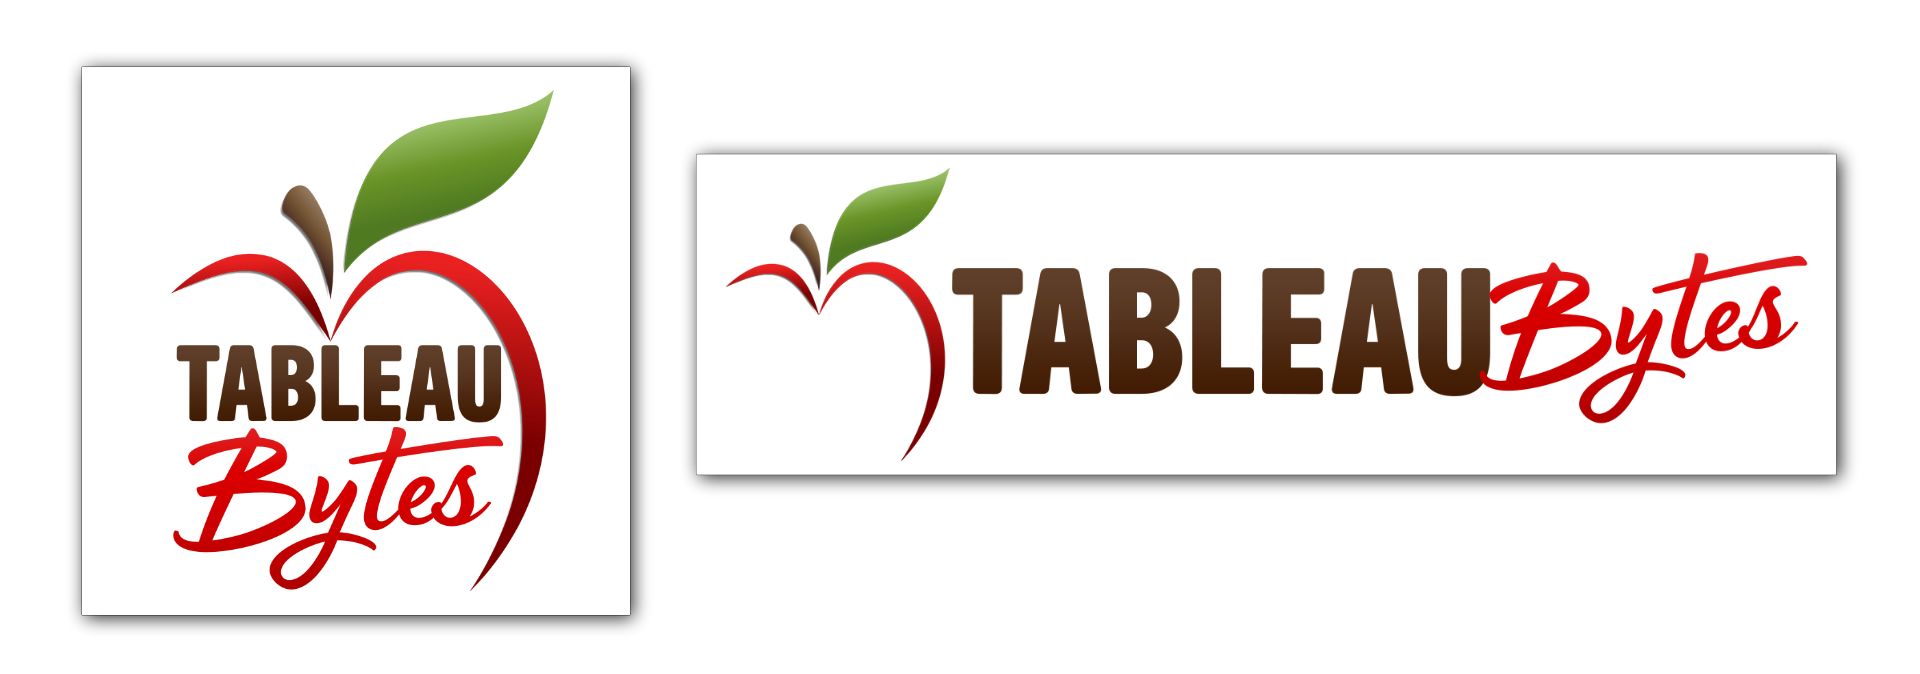 Image showing both the square and long form of the TableauBytes logo